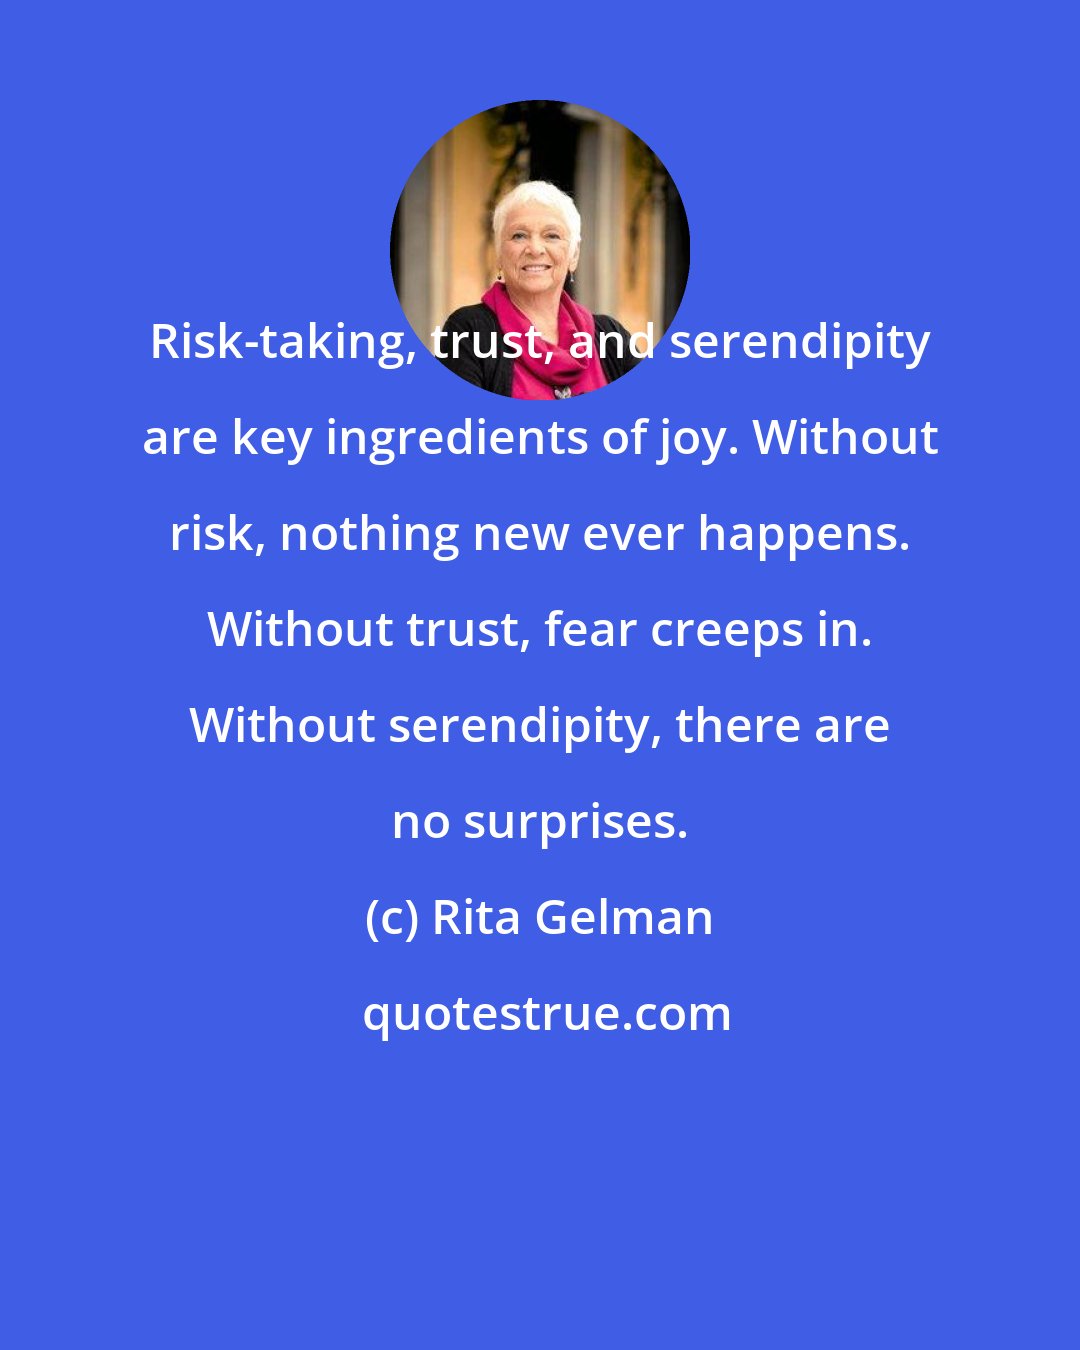 Rita Gelman: Risk-taking, trust, and serendipity are key ingredients of joy. Without risk, nothing new ever happens. Without trust, fear creeps in. Without serendipity, there are no surprises.